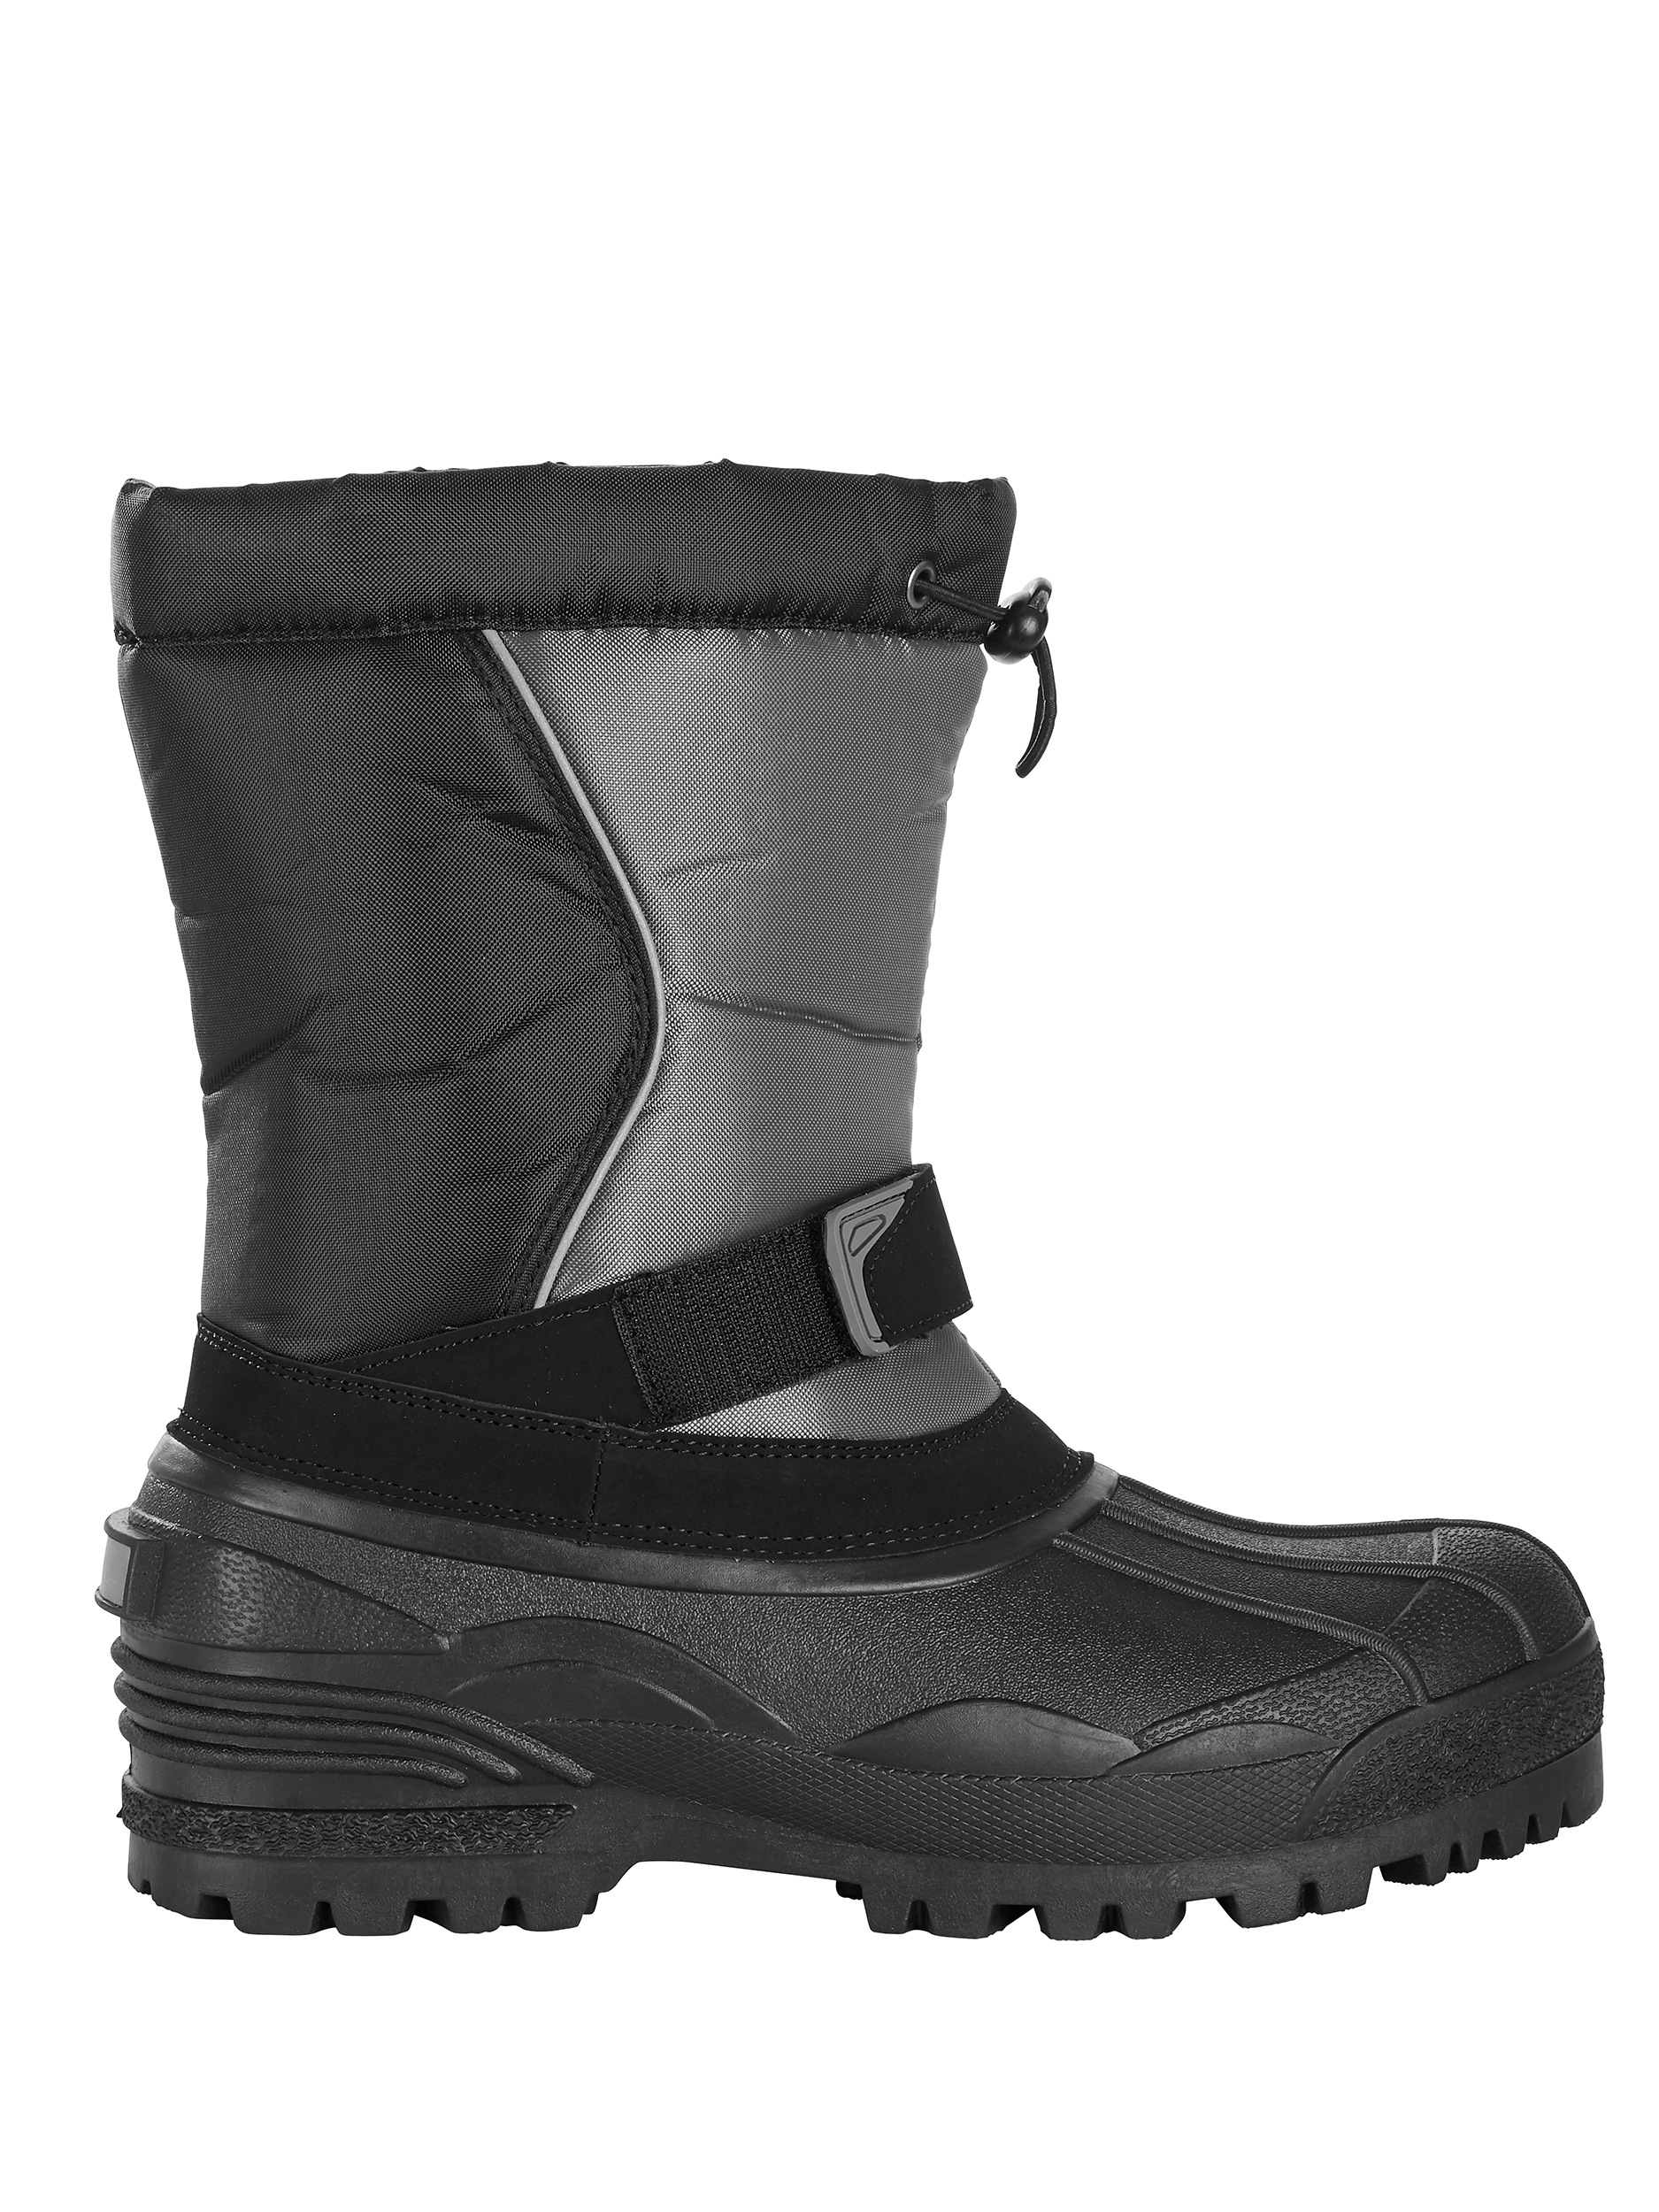 George Men's Essential Winter Boots - image 2 of 6